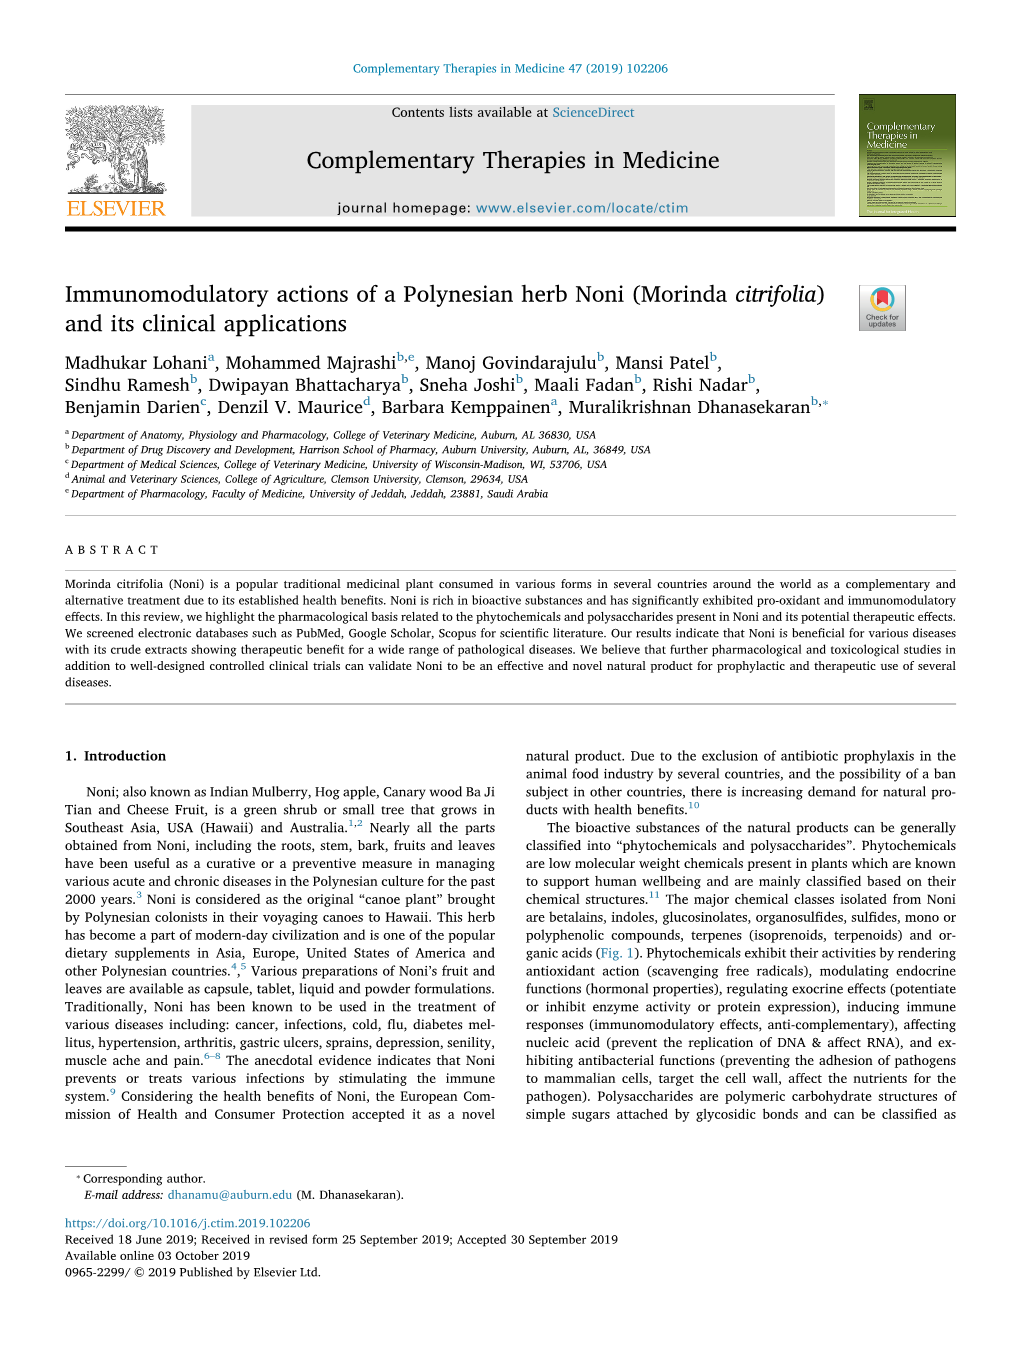 Morinda Citrifolia) and Its Clinical Applications T